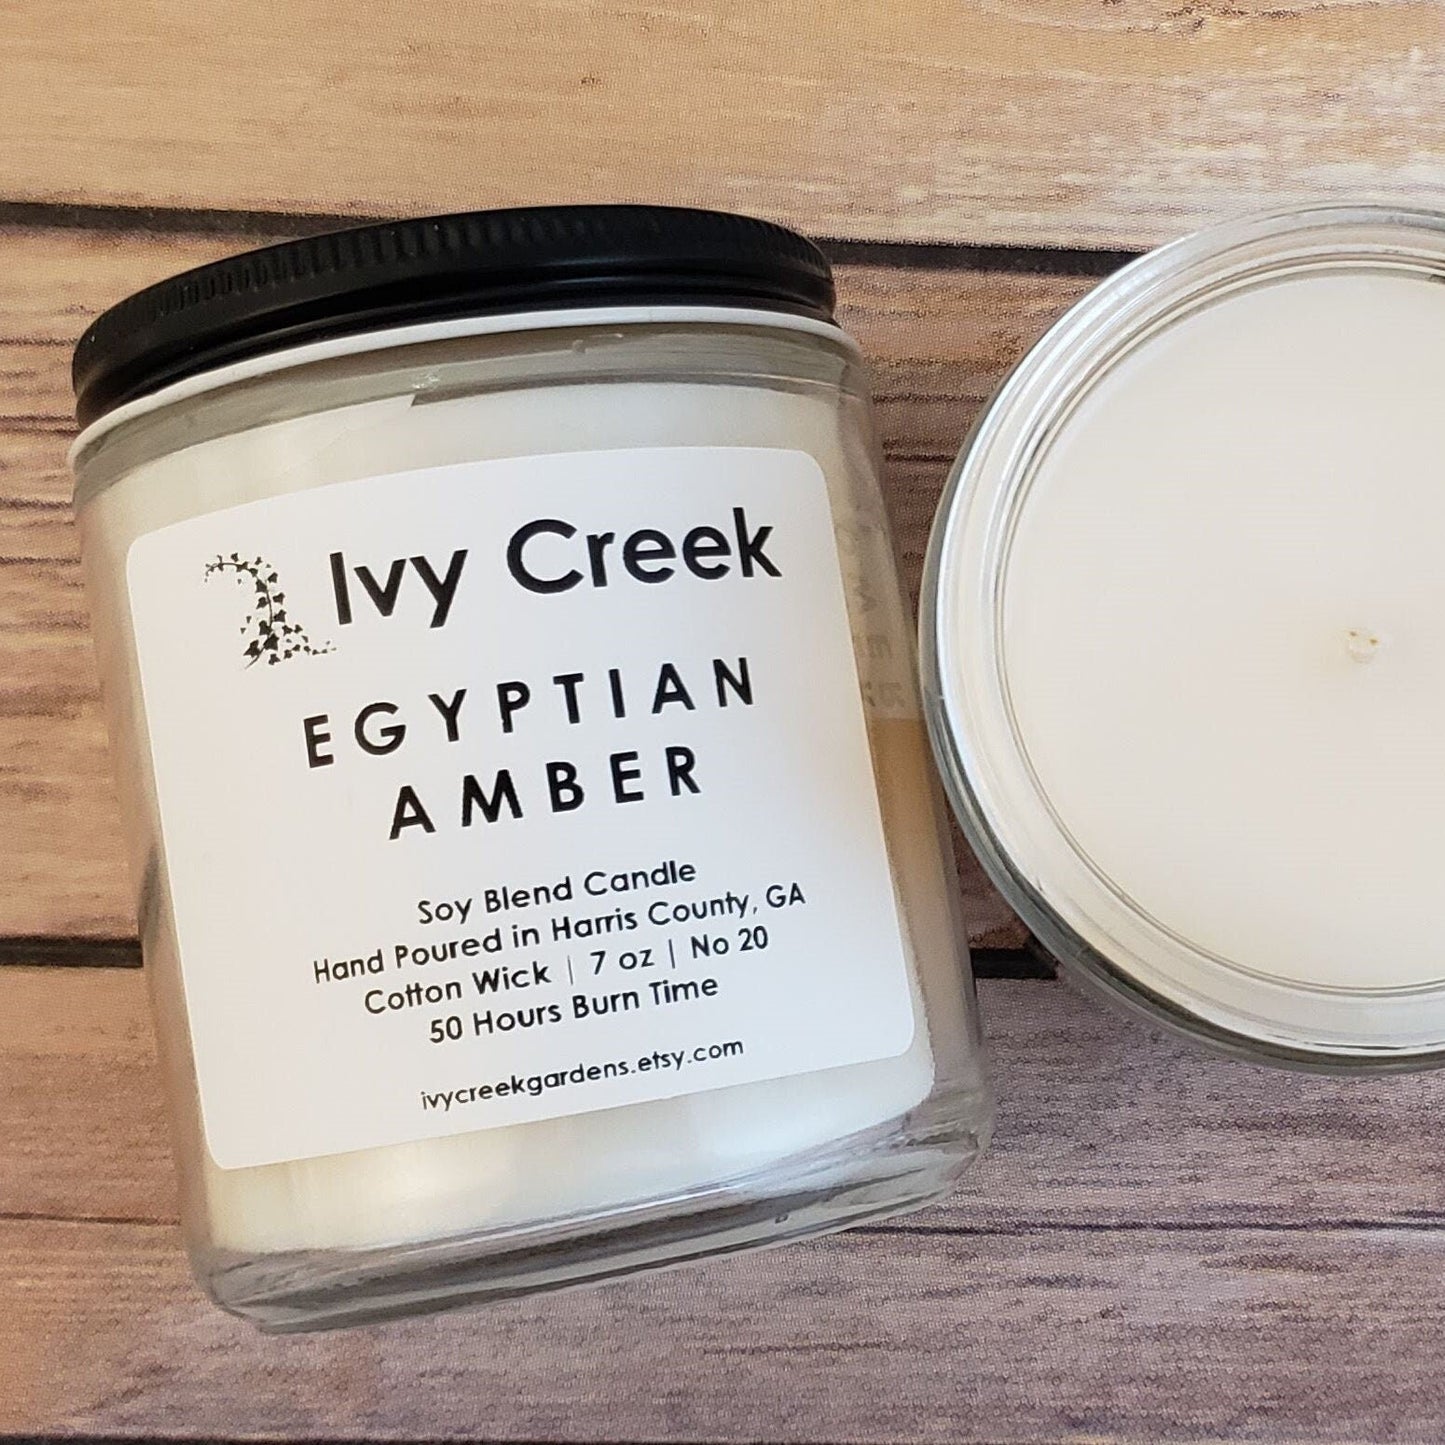 Ivy Creek No. 20 Egyptian Amber Soy Blend Candle | Hand-Poured | 7 oz | Cotton Wick | Small Batch | Clean Burning | Container Candle